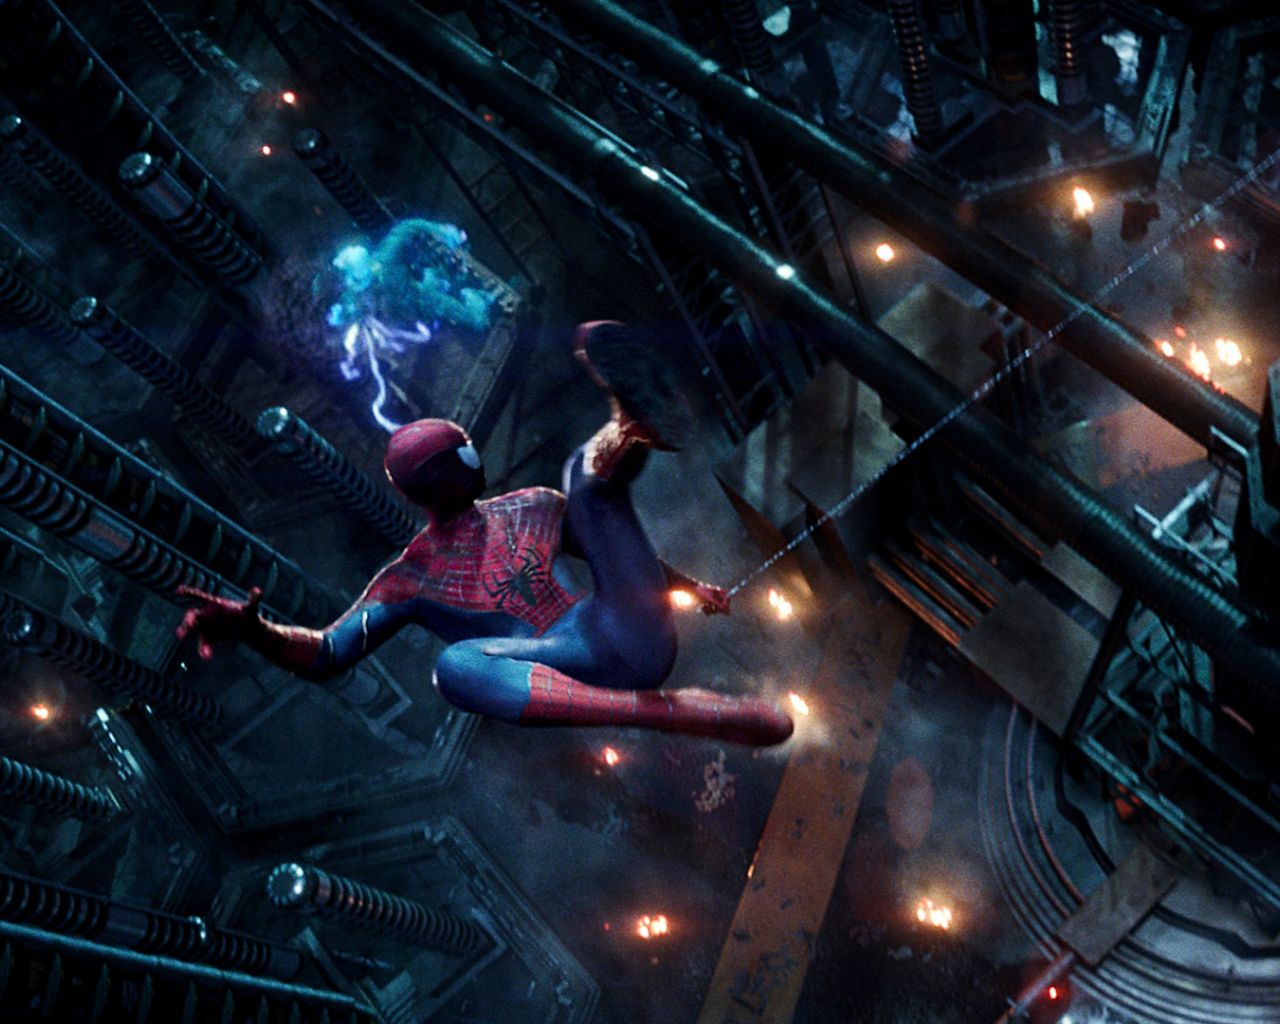 Free Download Spiderman Wallpaper HD 1080p Electro Vs Spider Man The [1920x1080] For Your Desktop, Mobile & Tablet. Explore Spiderman Wallpaper 1080p. Spider Man HD Wallpaper 1080p, Spider Man Wallpaper